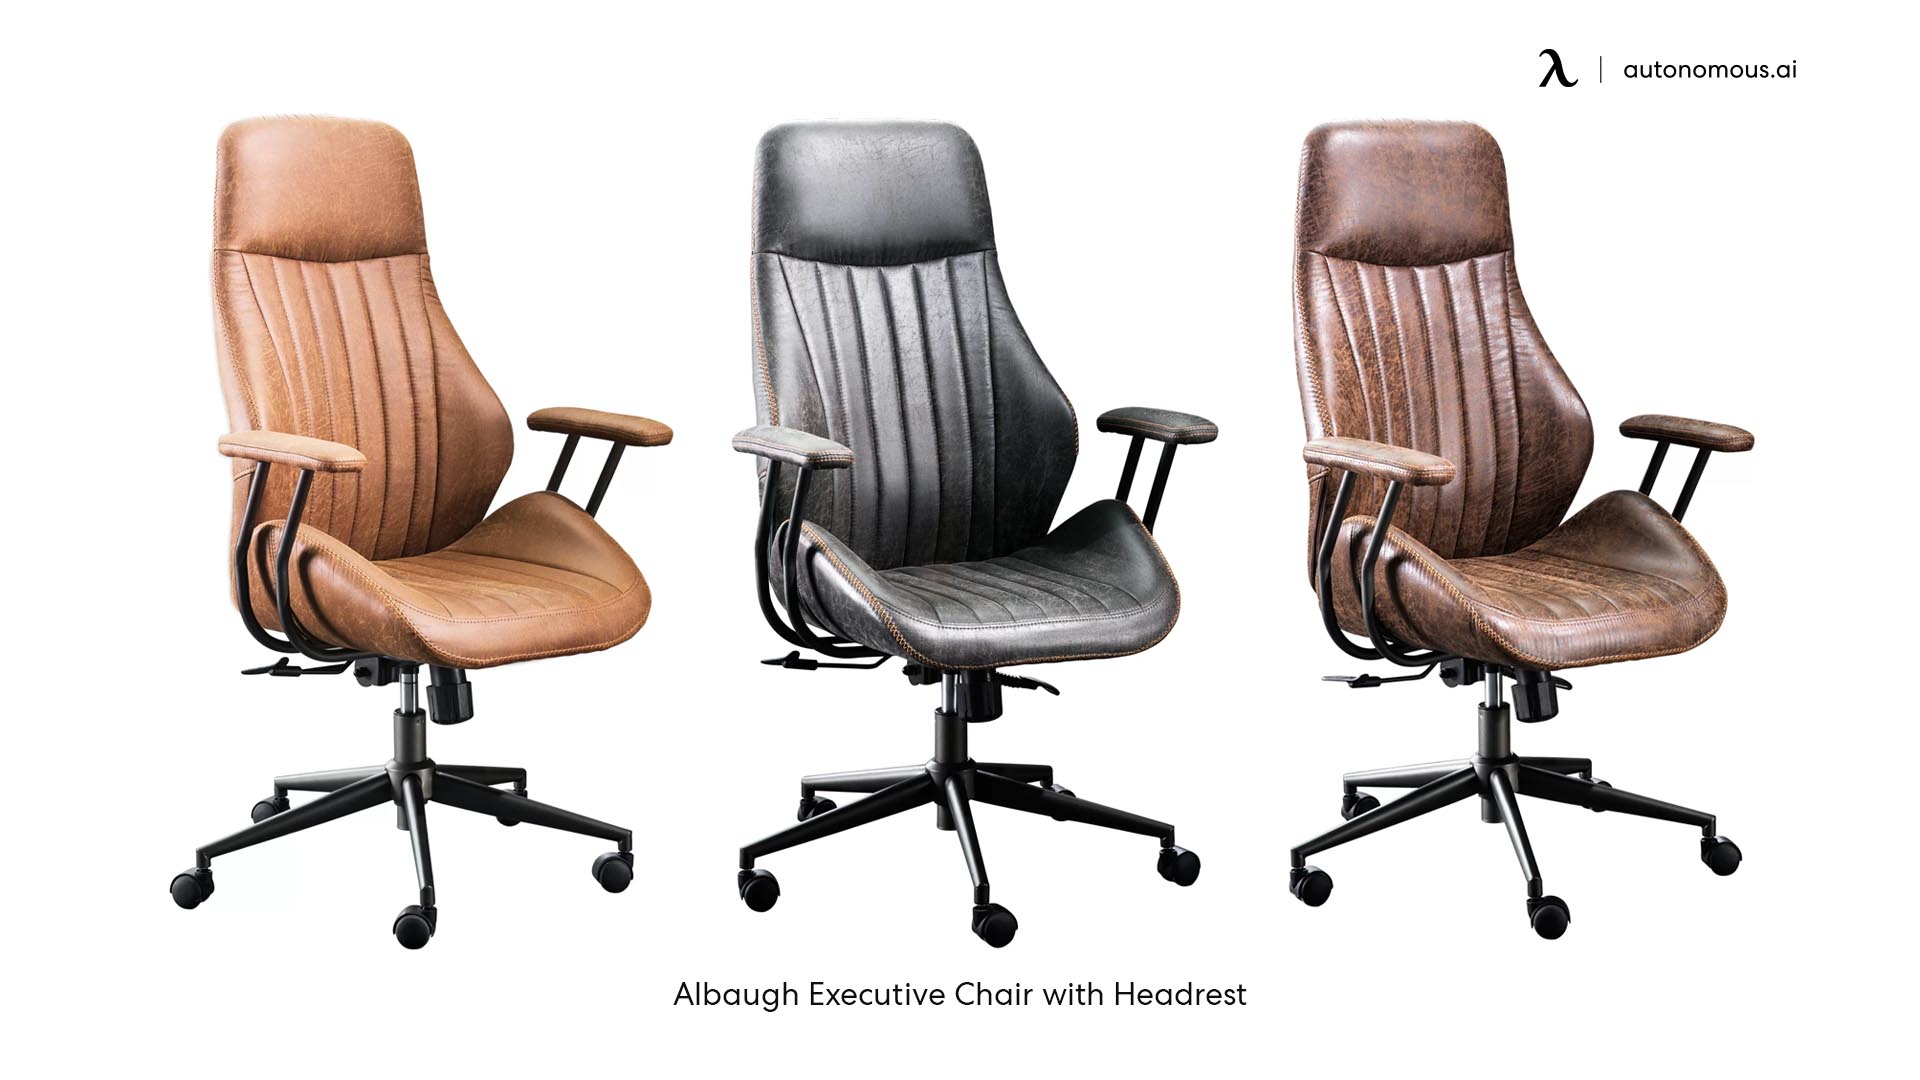 Albaugh Executive trendy office chair